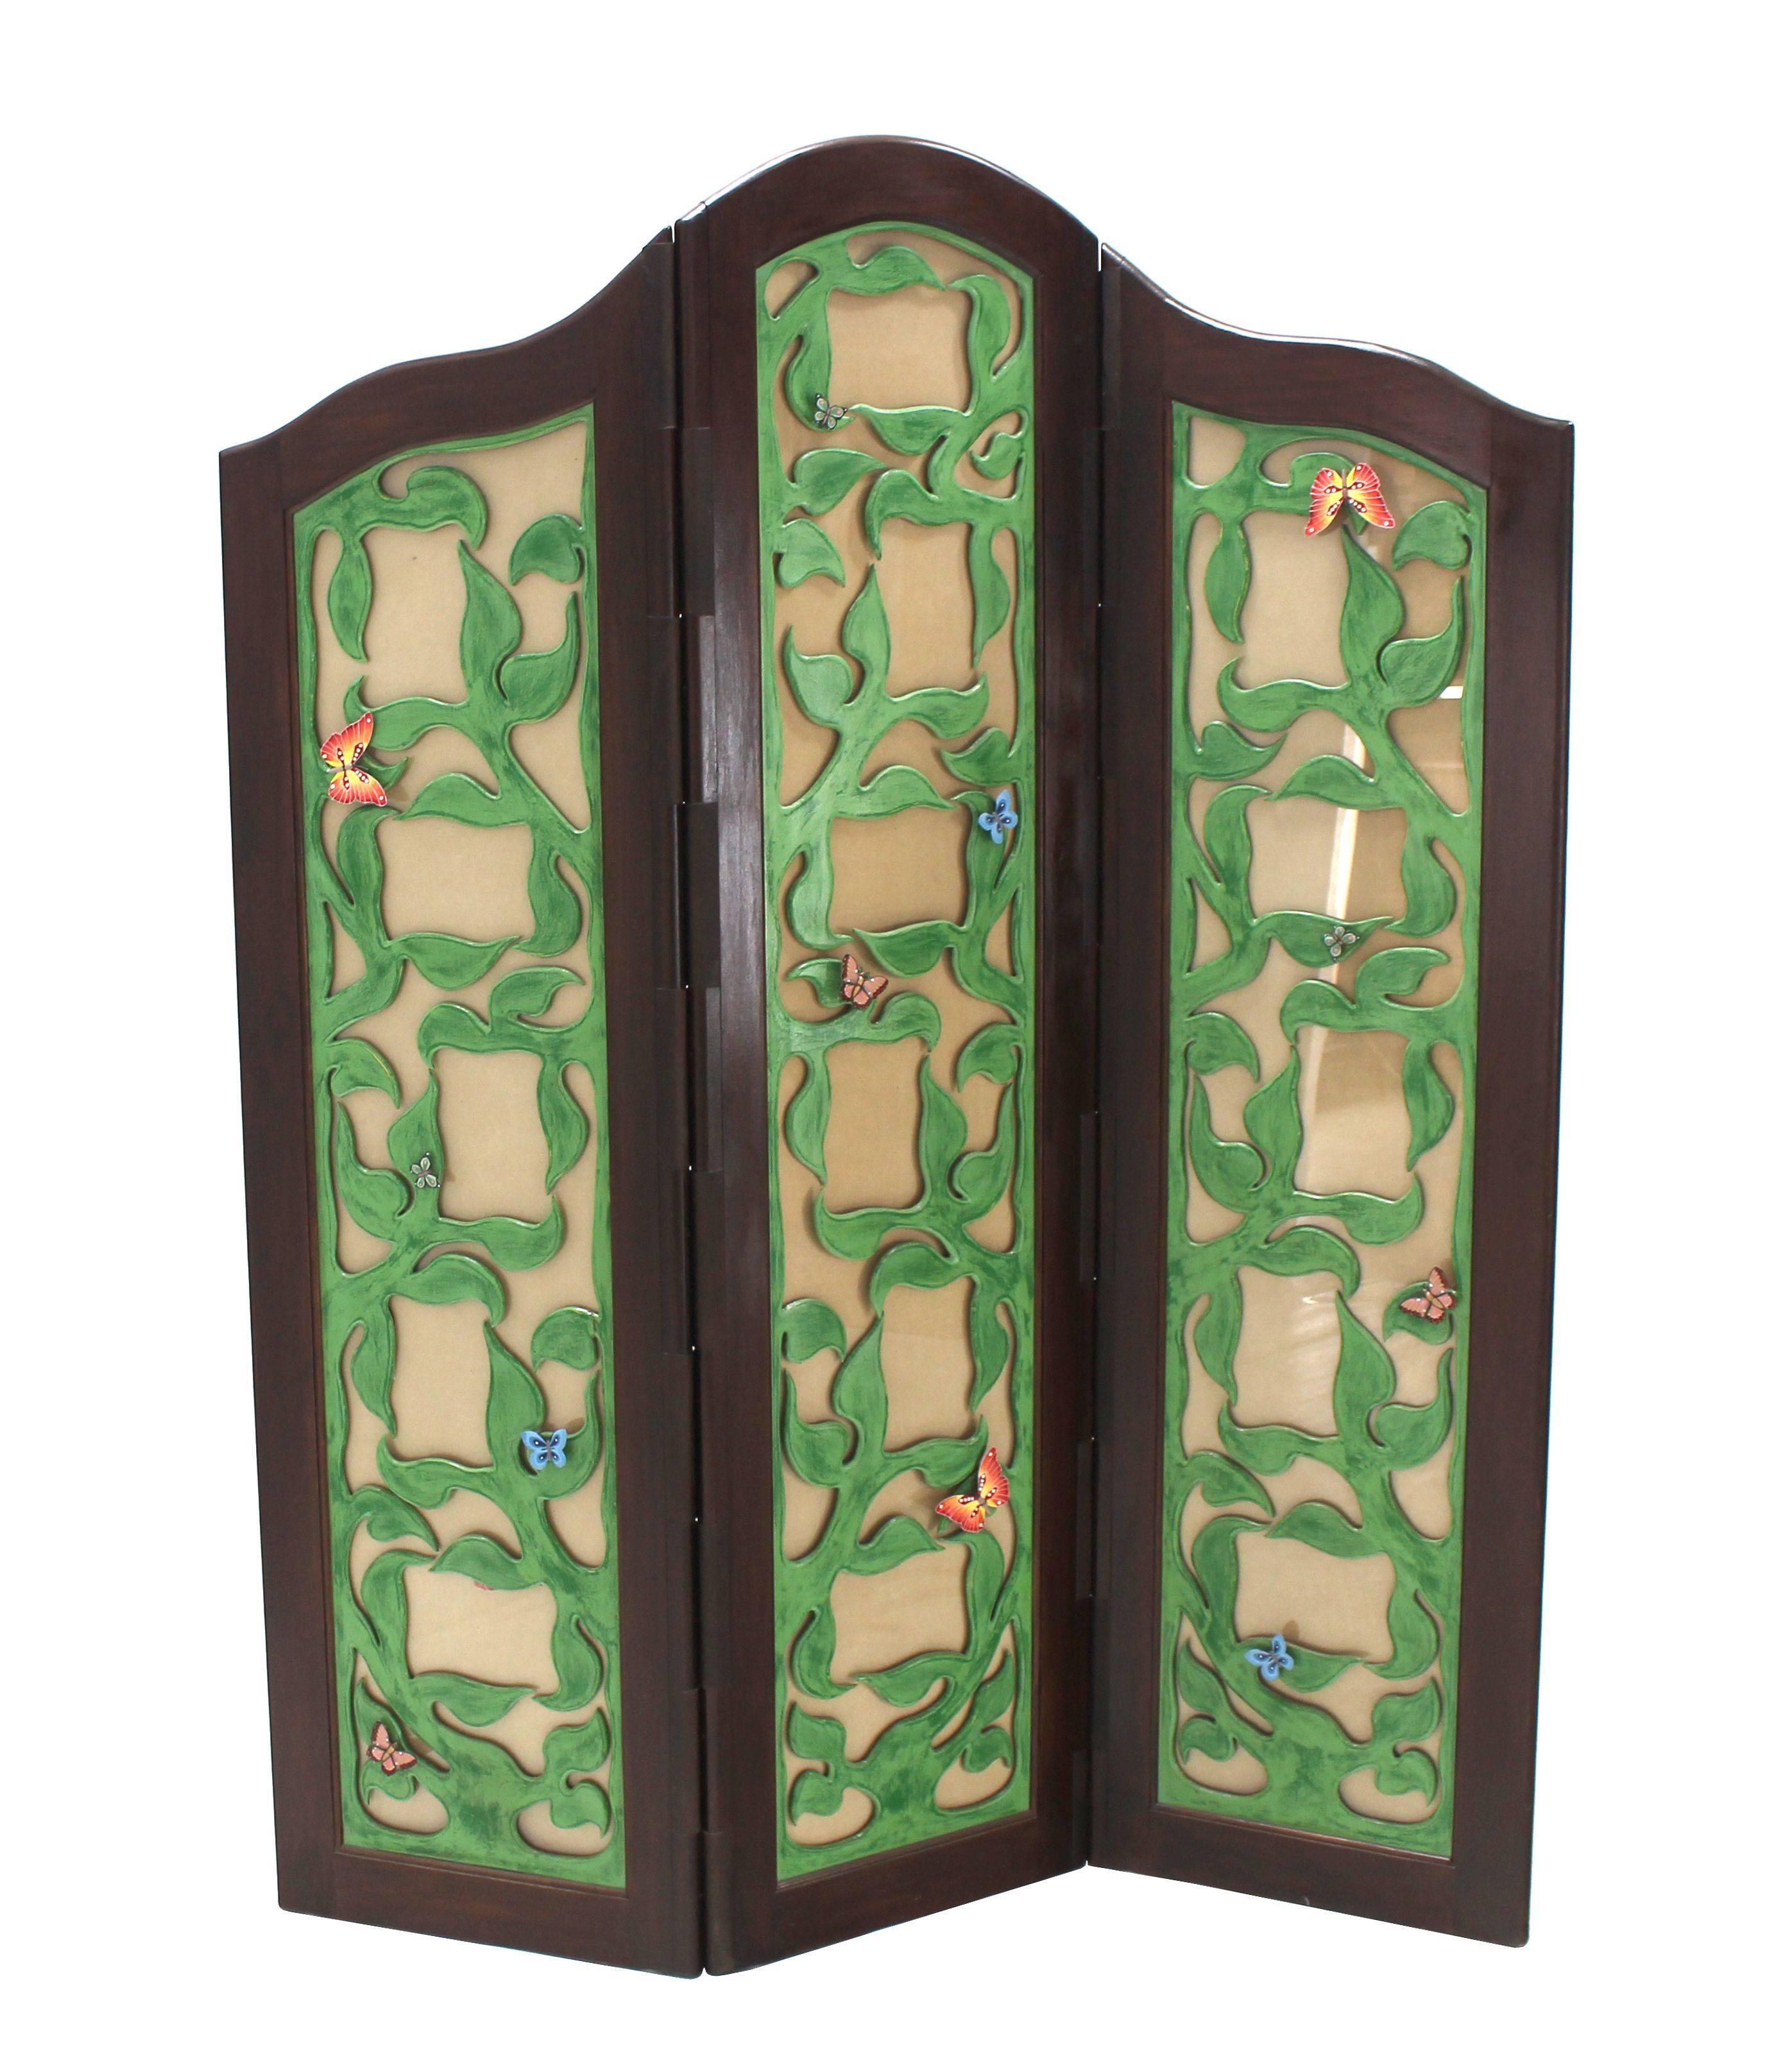 Decorative vintage Mid-Century Modern tufted diamond patern upholstery side and carved  3 three panel screen room divider.